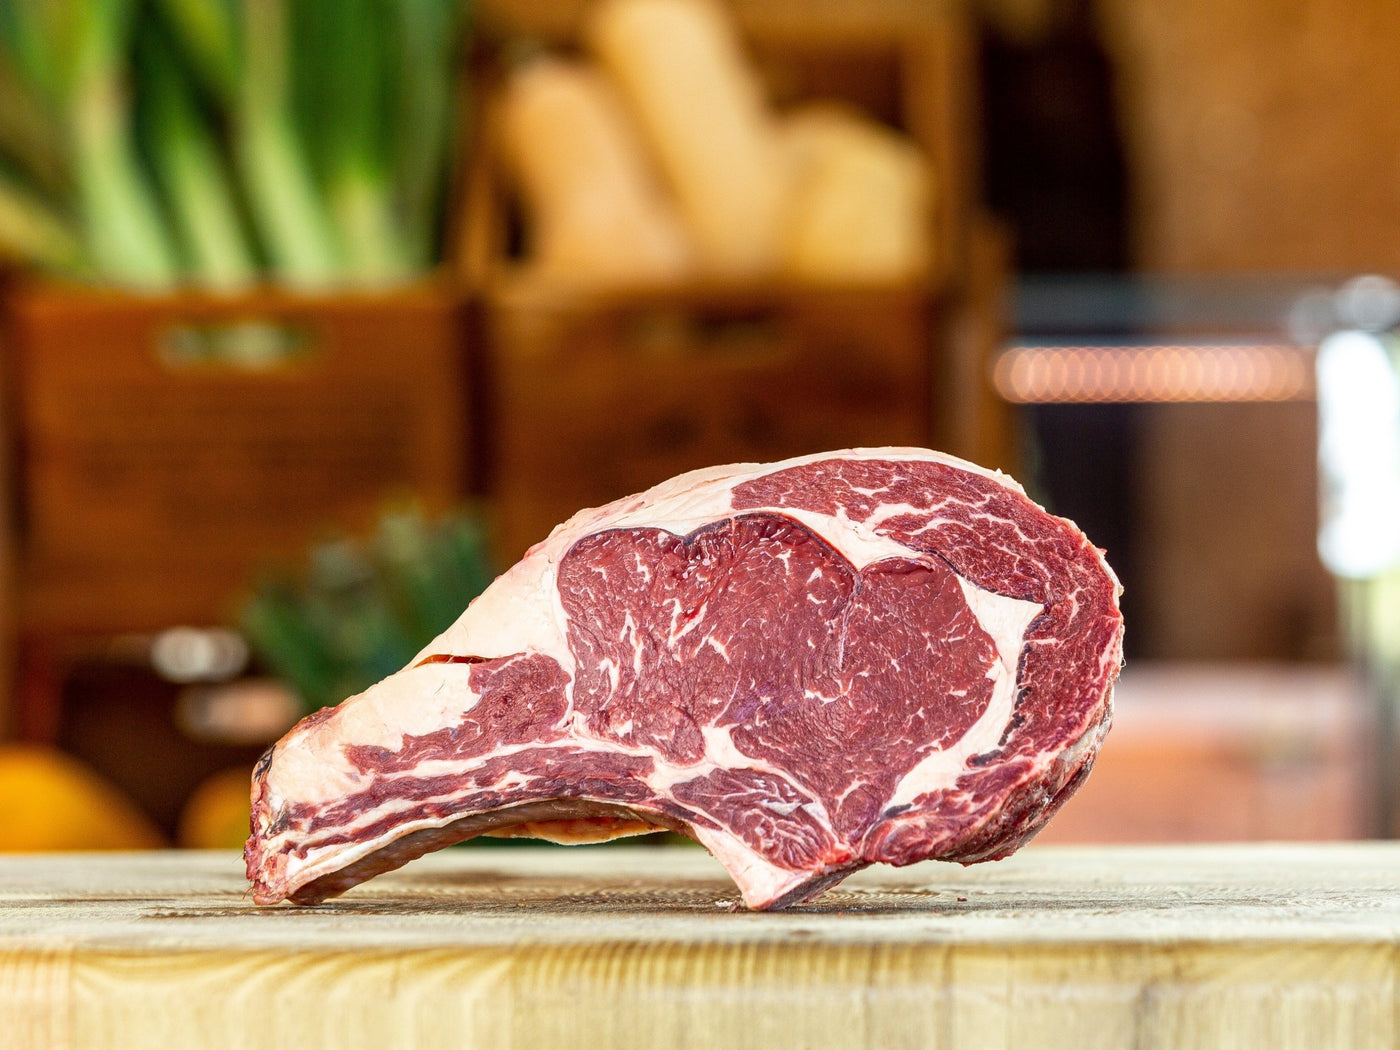 Grass Fed, Dry-Aged Cote De Boeuf - Beef - Thomas Joseph Butchery - Ethical Dry-Aged Meat The Best Steak UK Thomas Joseph Butchery